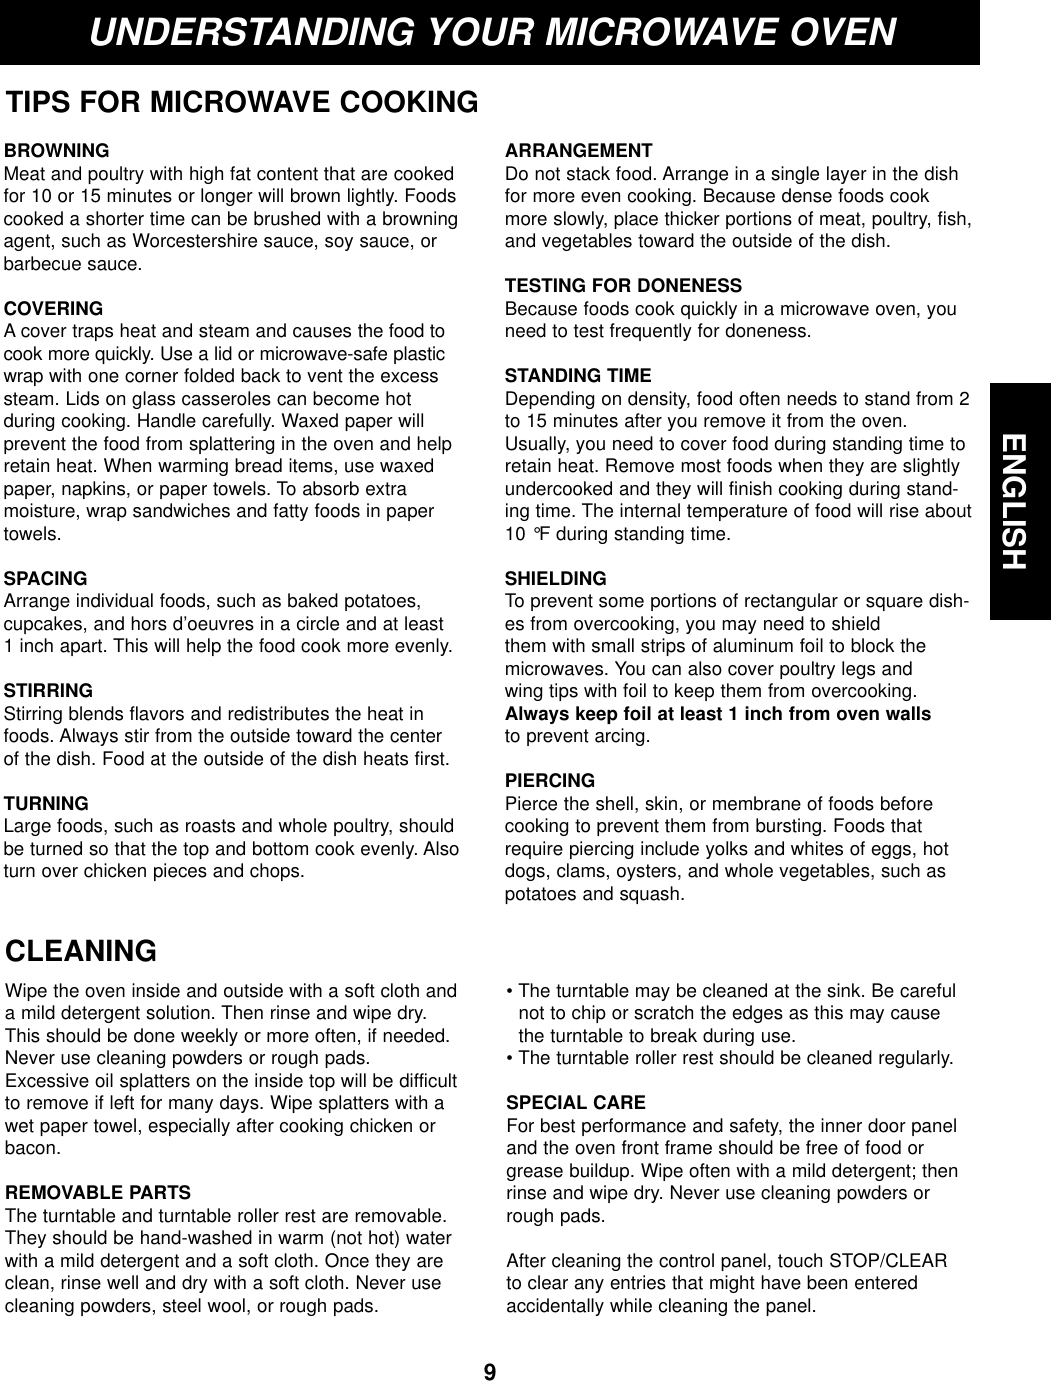 ENGLISH9UNDERSTANDING YOUR MICROWAVE OVENTIPS FOR MICROWAVE COOKINGBROWNINGMeat and poultry with high fat content that are cookedfor 10 or 15 minutes or longer will brown lightly. Foodscooked a shorter time can be brushed with a browningagent, such as Worcestershire sauce, soy sauce, orbarbecue sauce.COVERING A cover traps heat and steam and causes the food tocook more quickly. Use a lid or microwave-safe plasticwrap with one corner folded back to vent the excesssteam. Lids on glass casseroles can become hot during cooking. Handle carefully. Waxed paper will prevent the food from splattering in the oven and helpretain heat. When warming bread items, use waxedpaper, napkins, or paper towels. To absorb extra moisture, wrap sandwiches and fatty foods in papertowels.SPACINGArrange individual foods, such as baked potatoes, cupcakes, and hors d’oeuvres in a circle and at least 1 inch apart. This will help the food cook more evenly.STIRRING Stirring blends flavors and redistributes the heat infoods. Always stir from the outside toward the center of the dish. Food at the outside of the dish heats first.TURNINGLarge foods, such as roasts and whole poultry, shouldbe turned so that the top and bottom cook evenly. Alsoturn over chicken pieces and chops.ARRANGEMENTDo not stack food. Arrange in a single layer in the dishfor more even cooking. Because dense foods cookmore slowly, place thicker portions of meat, poultry, fish,and vegetables toward the outside of the dish.TESTING FOR DONENESS Because foods cook quickly in a microwave oven, youneed to test frequently for doneness.STANDING TIME Depending on density, food often needs to stand from 2to 15 minutes after you remove it from the oven.Usually, you need to cover food during standing time toretain heat. Remove most foods when they are slightlyundercooked and they will finish cooking during stand-ing time. The internal temperature of food will rise about10 °F during standing time.SHIELDING To prevent some portions of rectangular or square dish-es from overcooking, you may need to shield them with small strips of aluminum foil to block themicrowaves. You can also cover poultry legs and wing tips with foil to keep them from overcooking.Always keep foil at least 1 inch from oven wallsto prevent arcing.PIERCING Pierce the shell, skin, or membrane of foods beforecooking to prevent them from bursting. Foods thatrequire piercing include yolks and whites of eggs, hotdogs, clams, oysters, and whole vegetables, such aspotatoes and squash.CLEANINGWipe the oven inside and outside with a soft cloth anda mild detergent solution. Then rinse and wipe dry.This should be done weekly or more often, if needed.Never use cleaning powders or rough pads.Excessive oil splatters on the inside top will be difficultto remove if left for many days. Wipe splatters with awet paper towel, especially after cooking chicken orbacon.REMOVABLE PARTSThe turntable and turntable roller rest are removable.They should be hand-washed in warm (not hot) waterwith a mild detergent and a soft cloth. Once they areclean, rinse well and dry with a soft cloth. Never usecleaning powders, steel wool, or rough pads.• The turntable may be cleaned at the sink. Be carefulnot to chip or scratch the edges as this may causethe turntable to break during use.• The turntable roller rest should be cleaned regularly.SPECIAL CAREFor best performance and safety, the inner door paneland the oven front frame should be free of food orgrease buildup. Wipe often with a mild detergent; thenrinse and wipe dry. Never use cleaning powders orrough pads.After cleaning the control panel, touch STOP/CLEARto clear any entries that might have been enteredaccidentally while cleaning the panel.